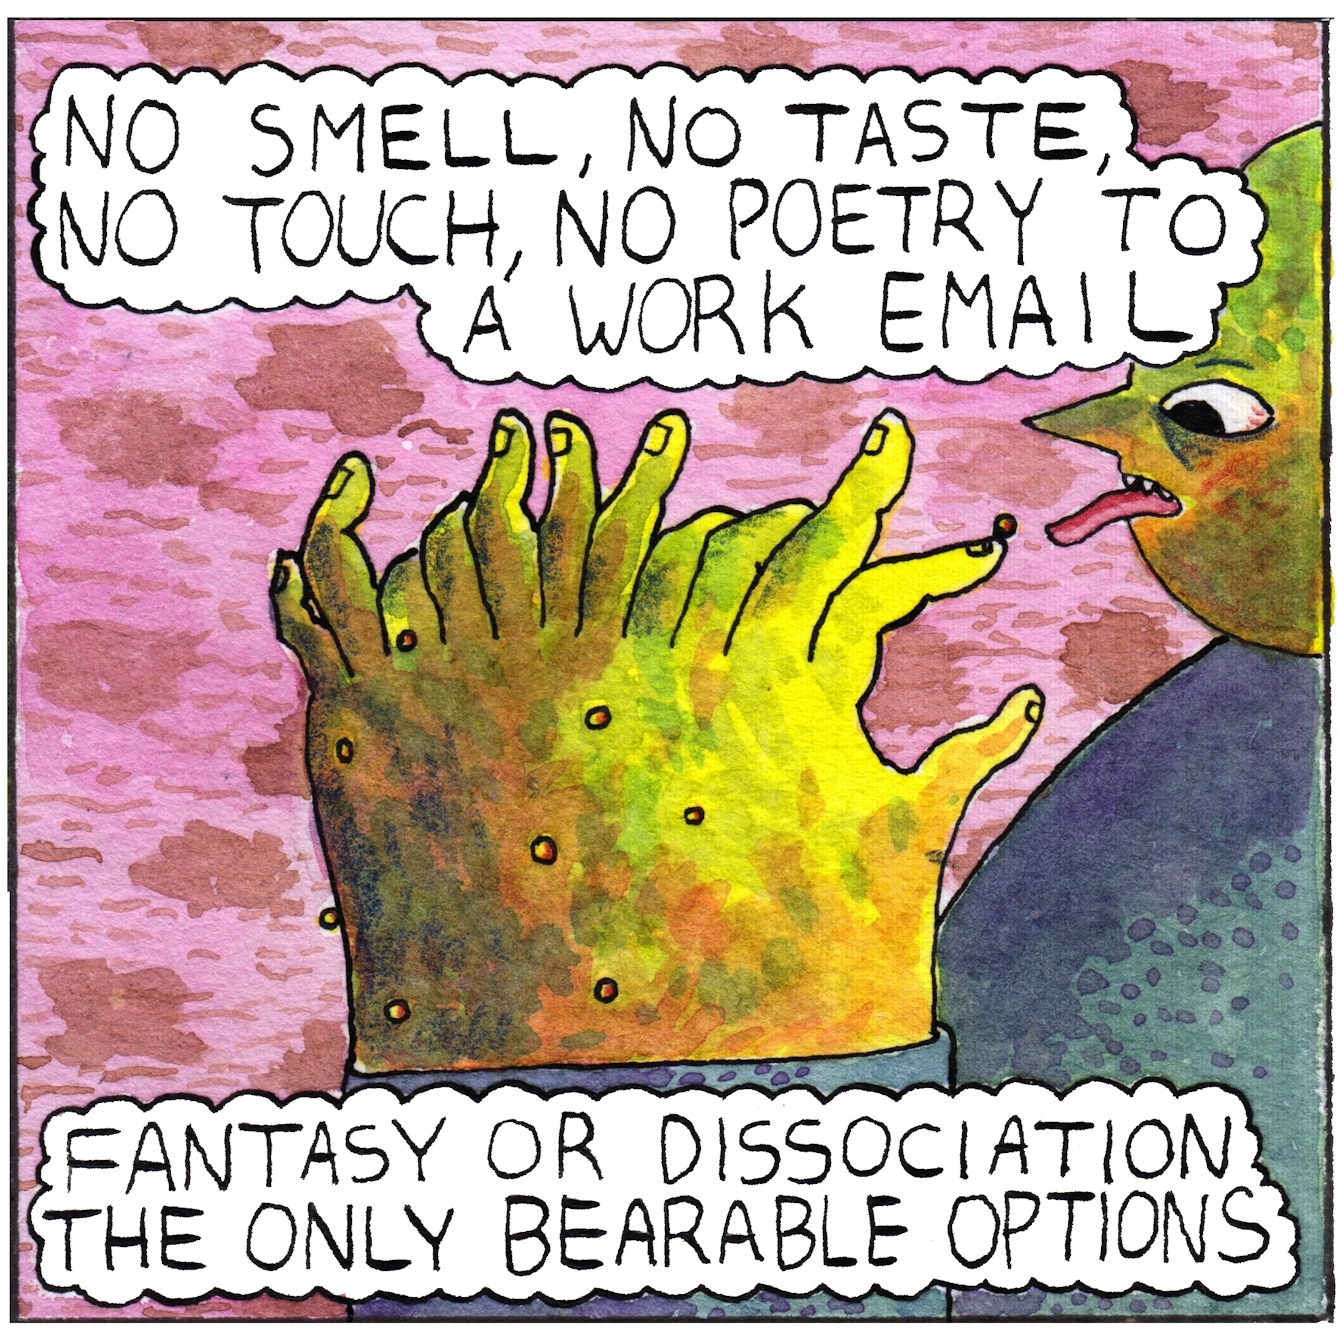 The sixth and final panel of the webcomic 'Doing emails' shows a figure looking at their large and distorted hand while reaching out their tongue towards a tiny globule on the tip of one of their fingers. The giant hand has 12 fingers flexing in different directions and more tiny globules can be seen attached to the back of their hand. The text bubbles at top and bottom of the panel say: "No smell, no taste, no touch, no poetry to a work email. Fantasy or dissociation the only bearable options."